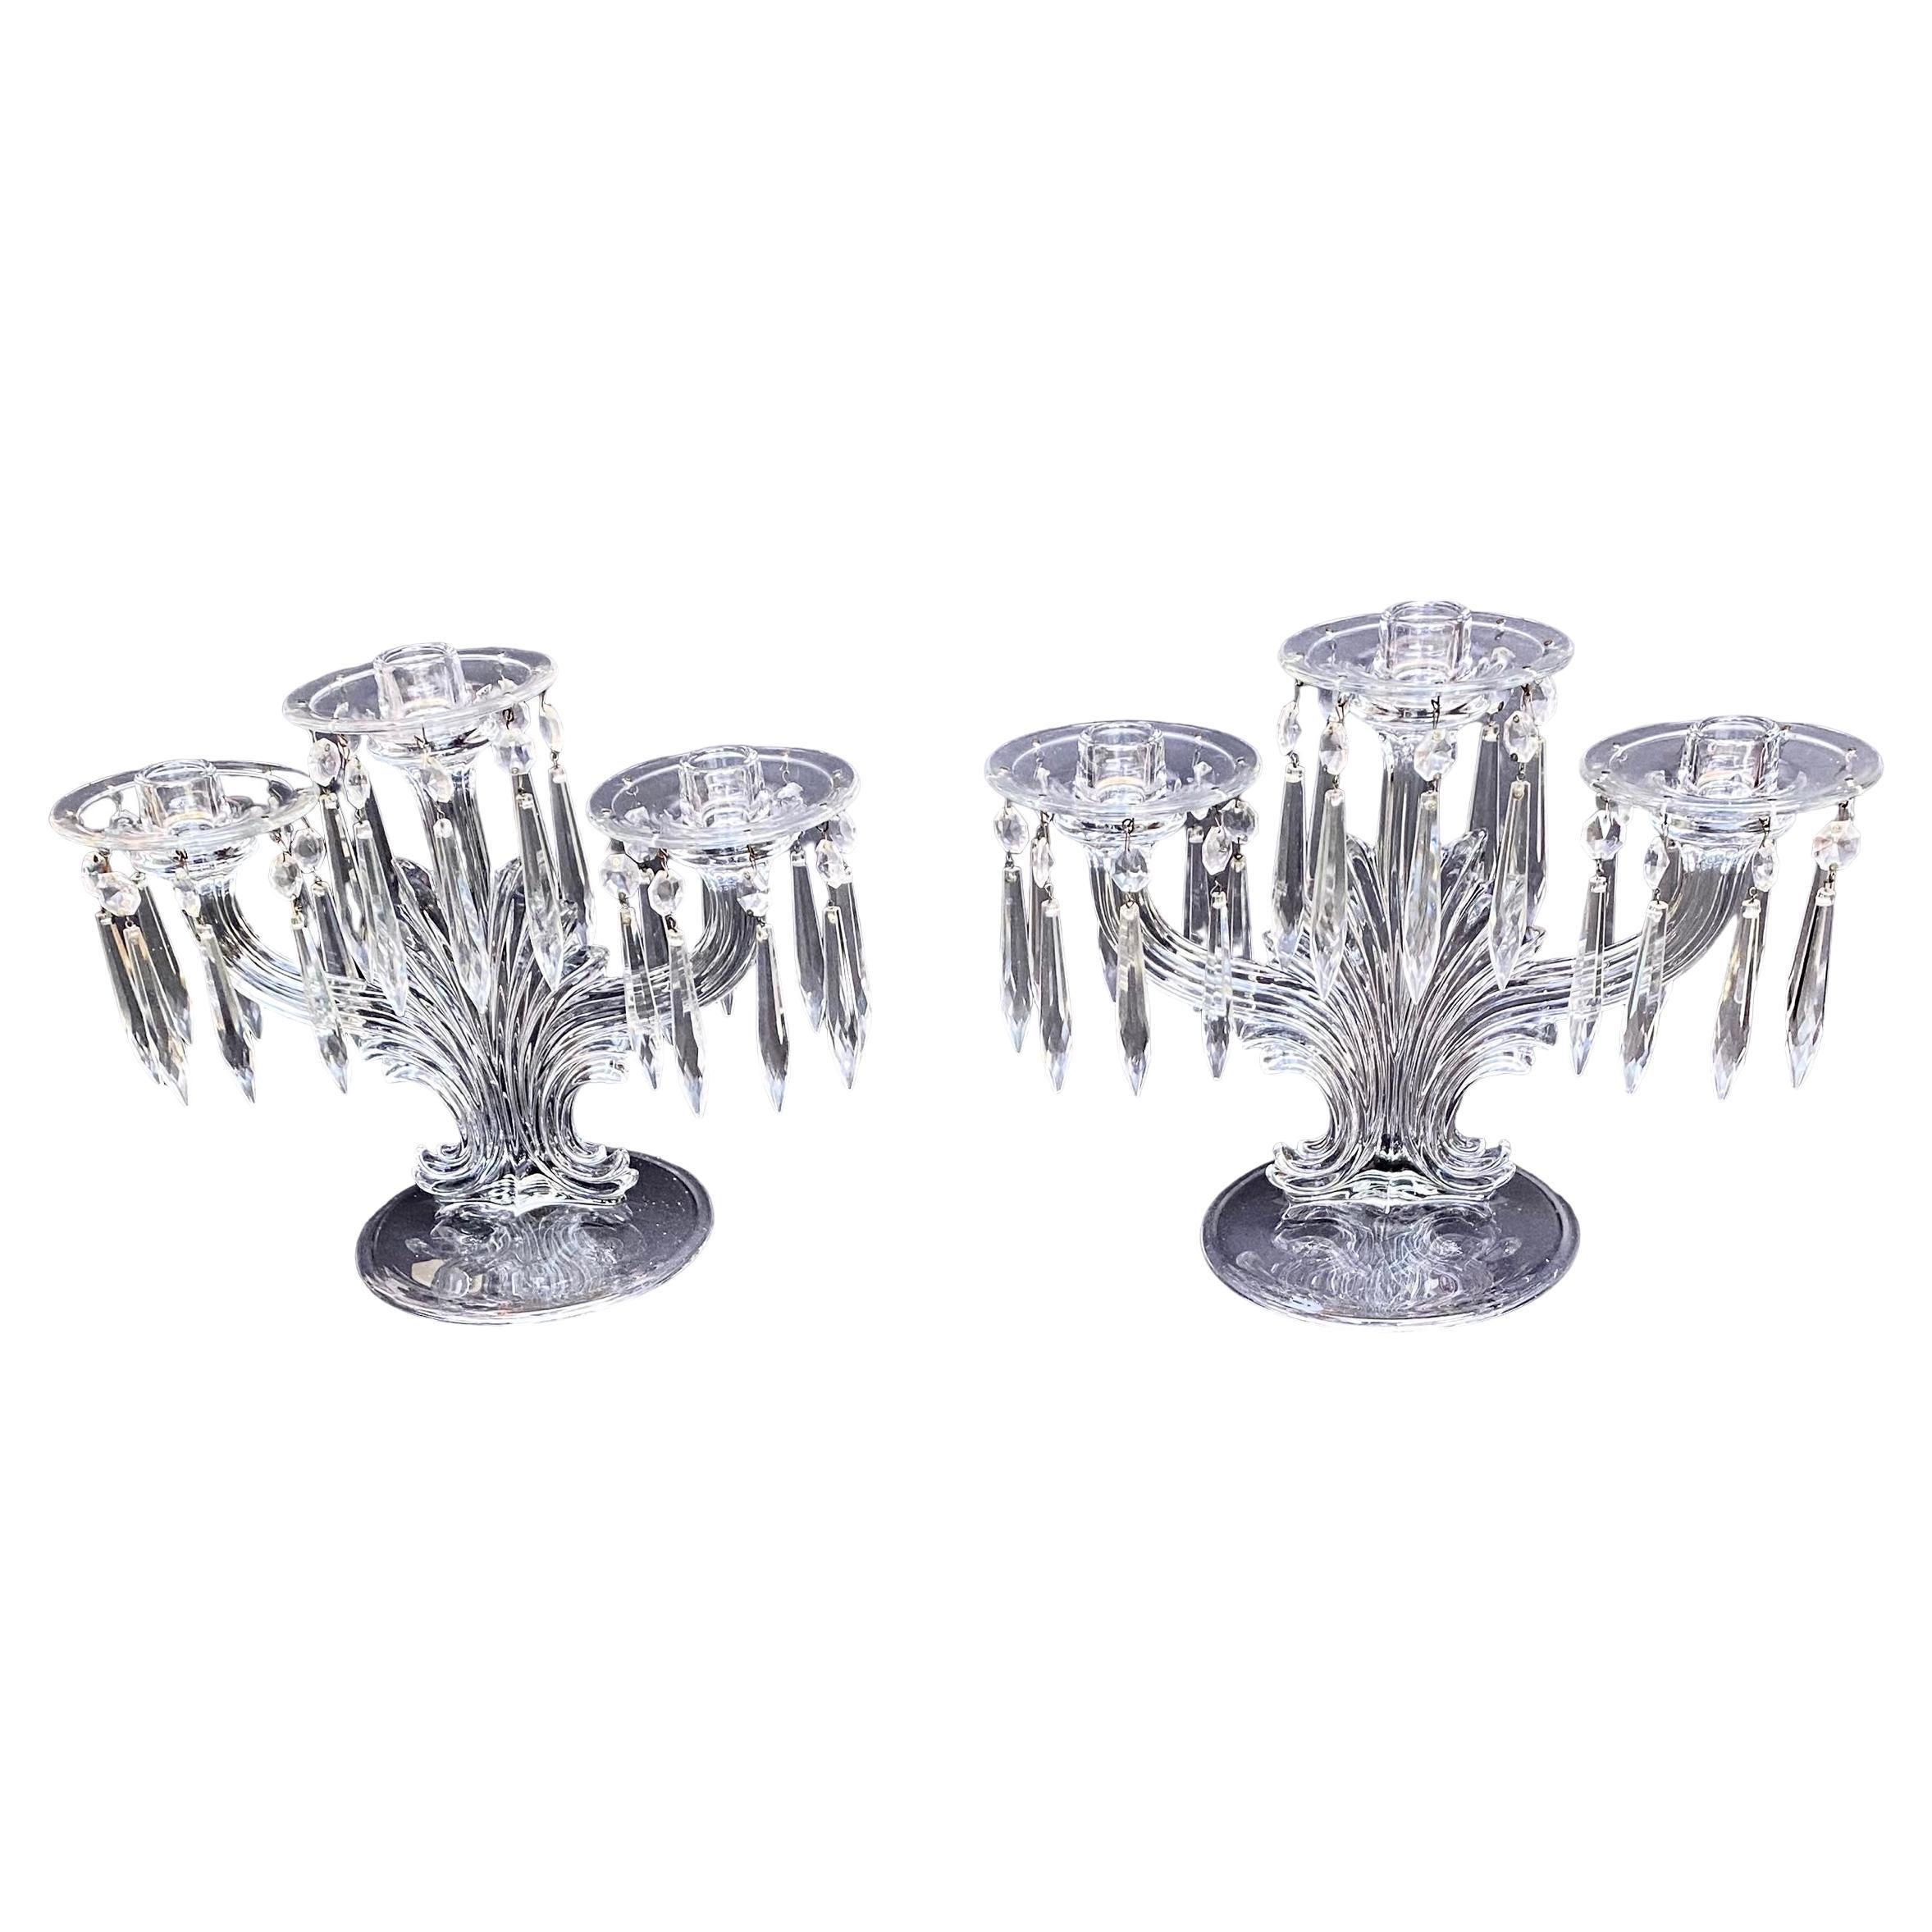 Pair of American Pressed Glass Three Light Candelabra, Early 20th C., on Swirled